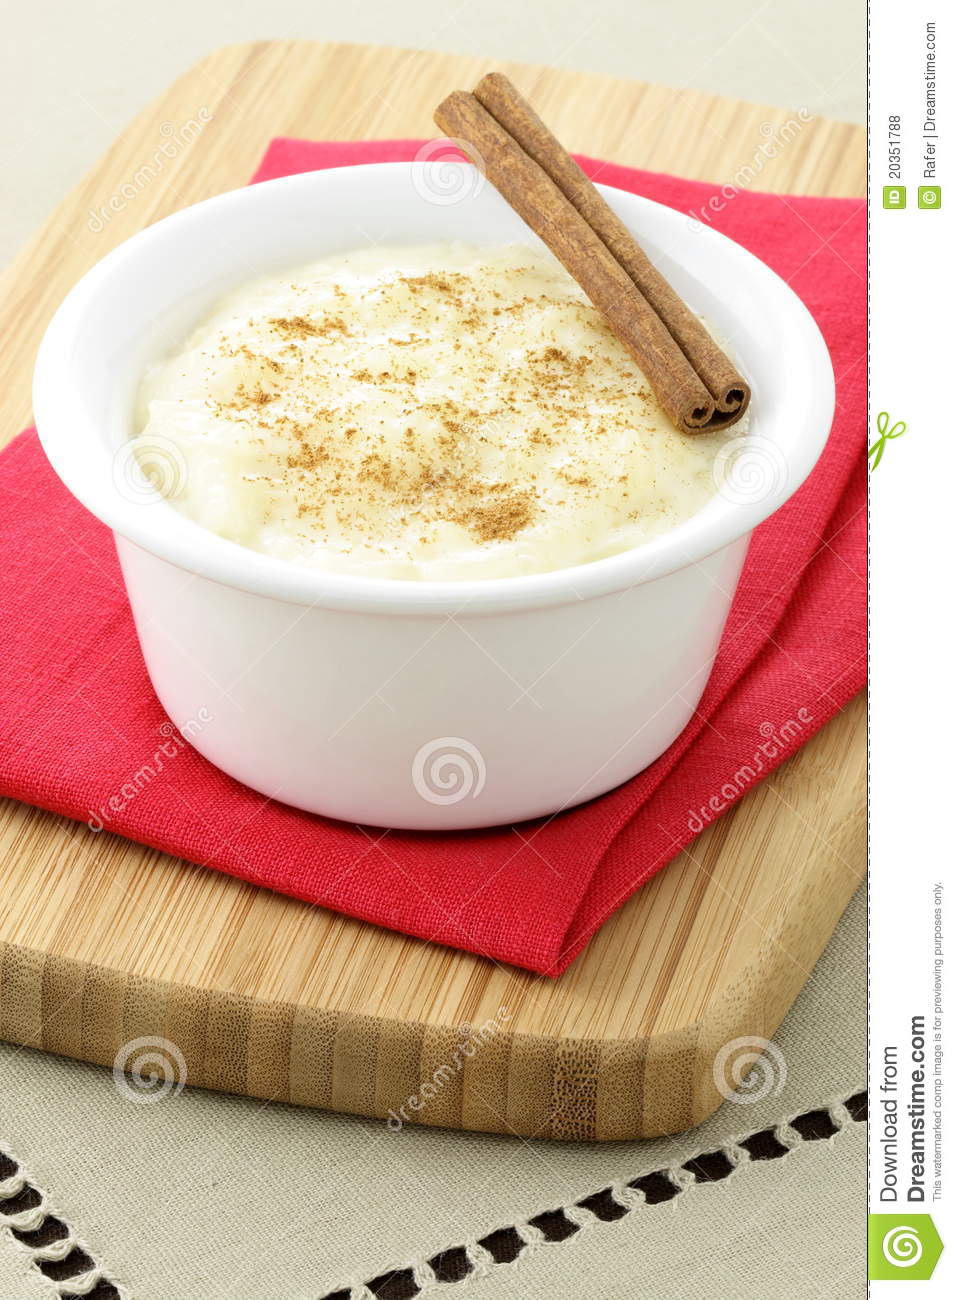 Delicious Rice Pudding With Cinnamon Raisins Or Brown Sugar On Top